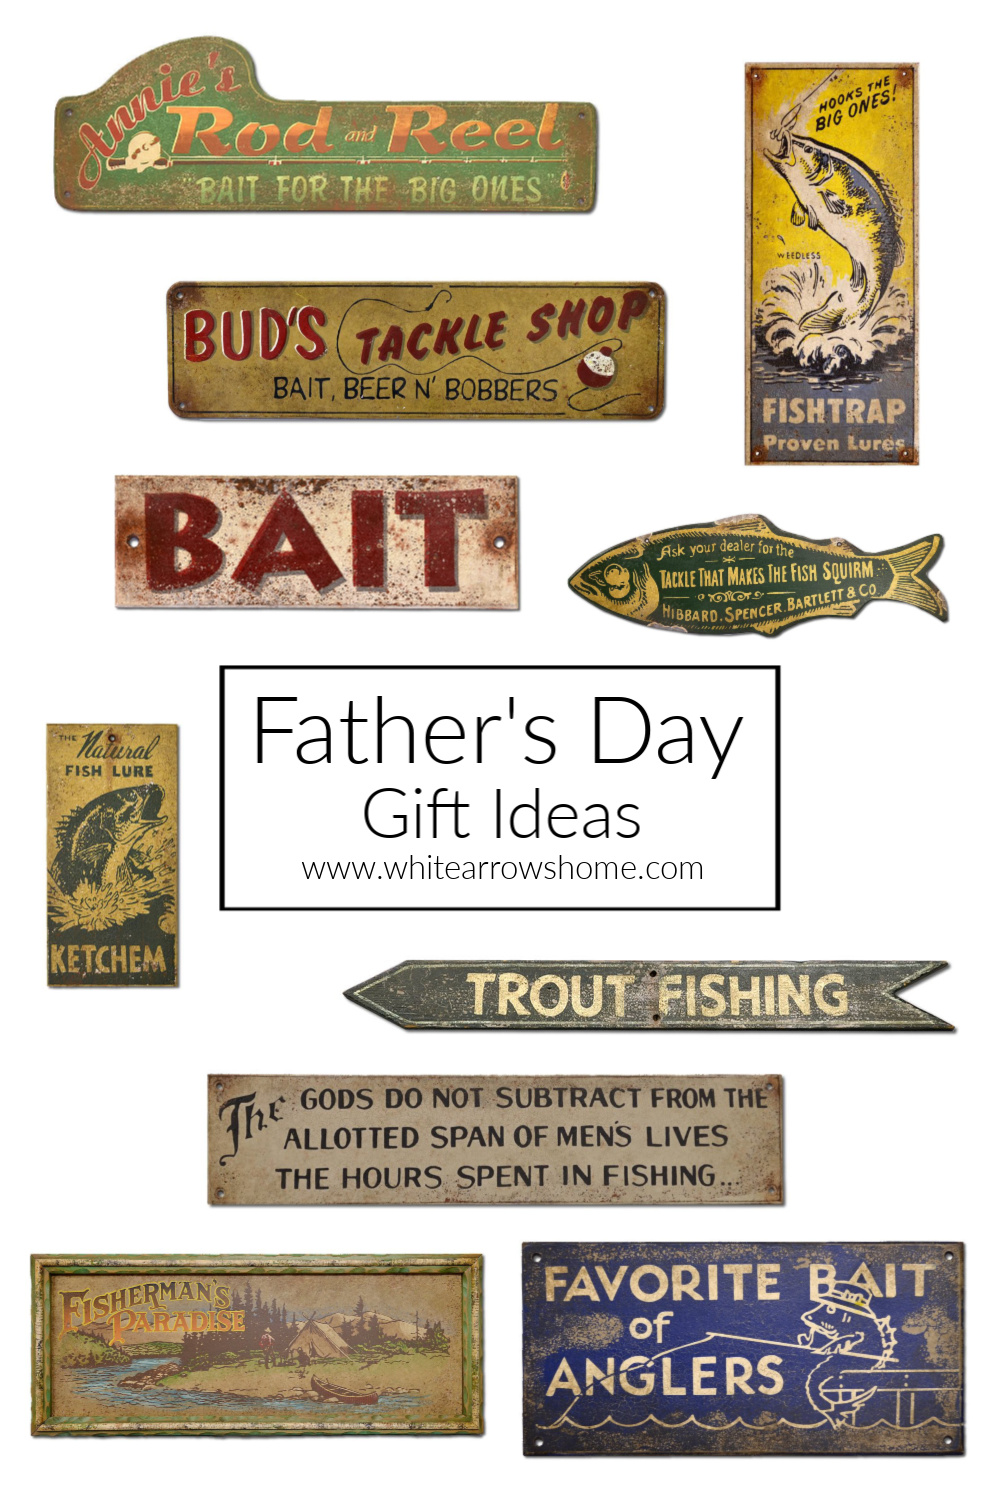 Father's Day fishing gift using antique lures